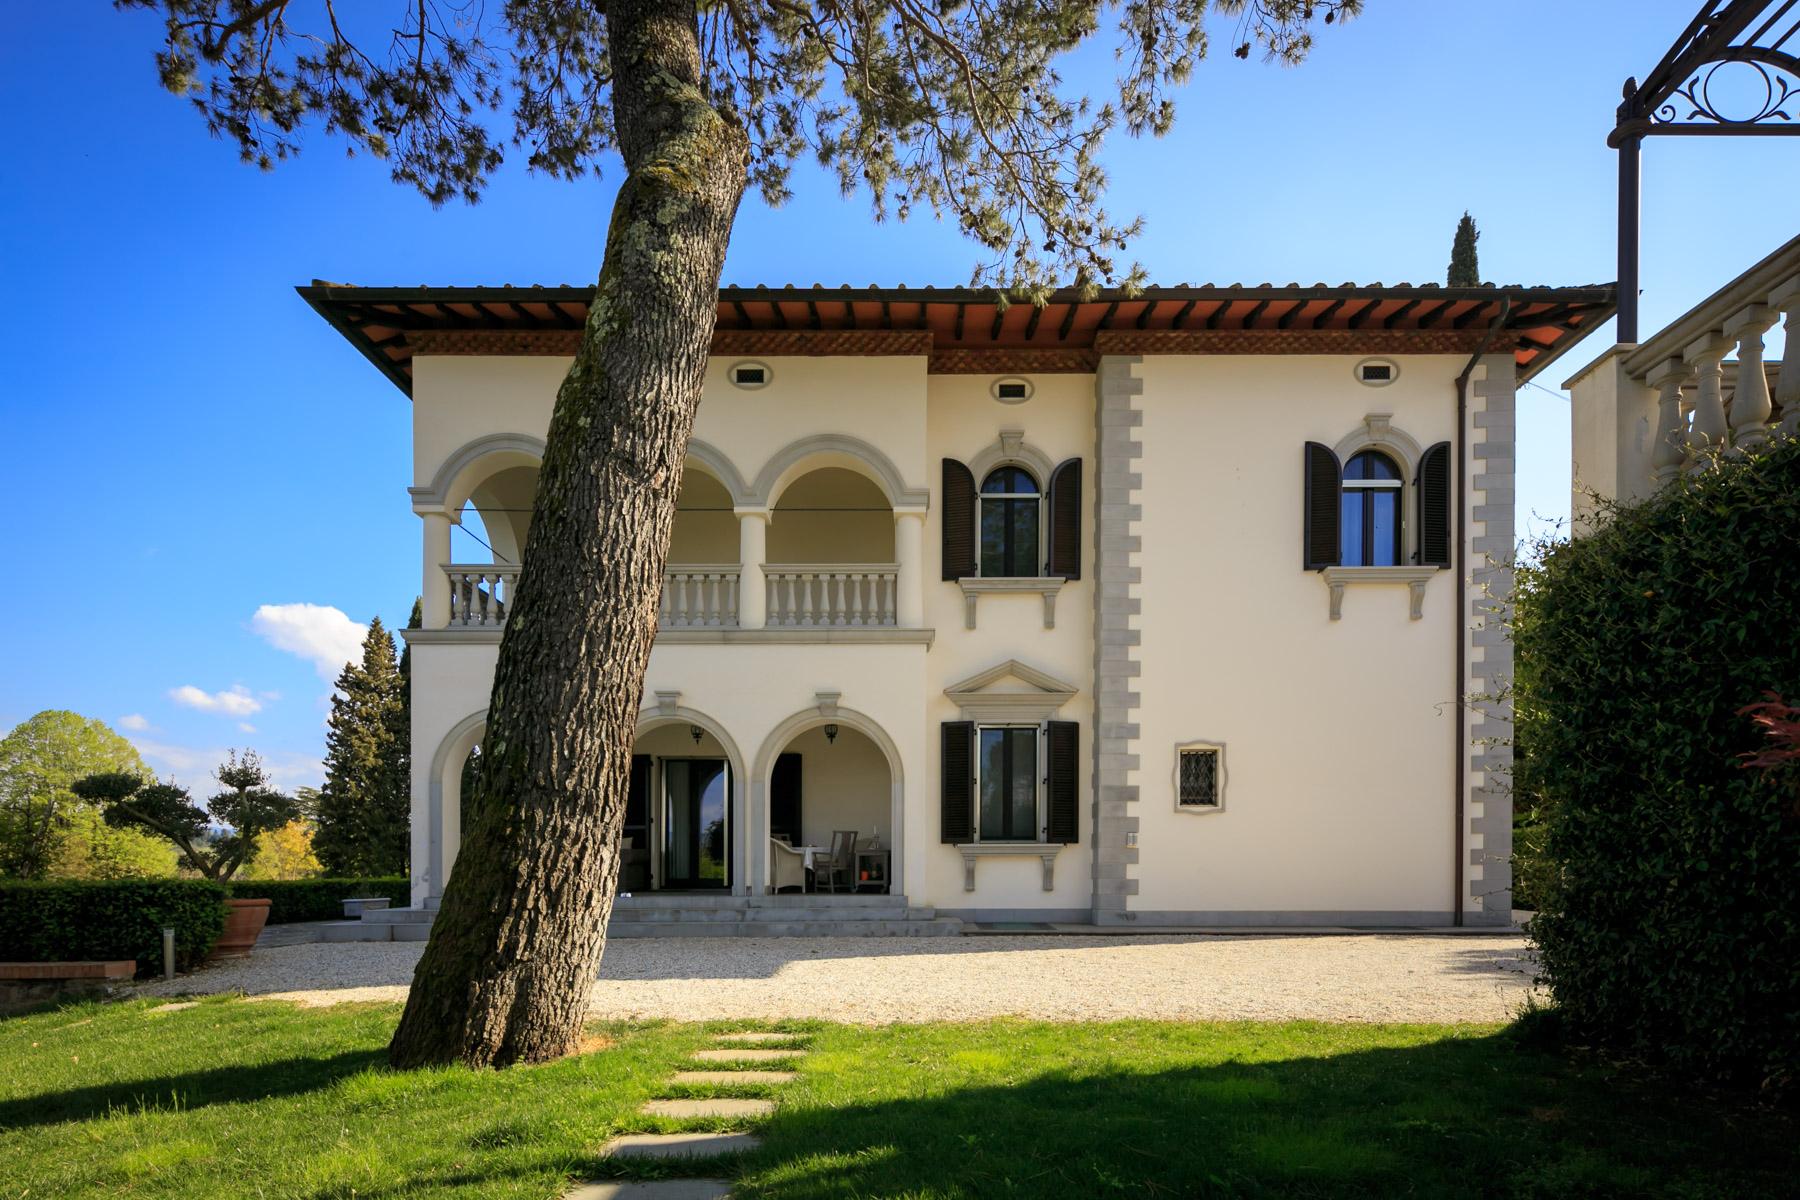 Splendid villa with pool on the Poggio Imperiale hill in Florence - 2